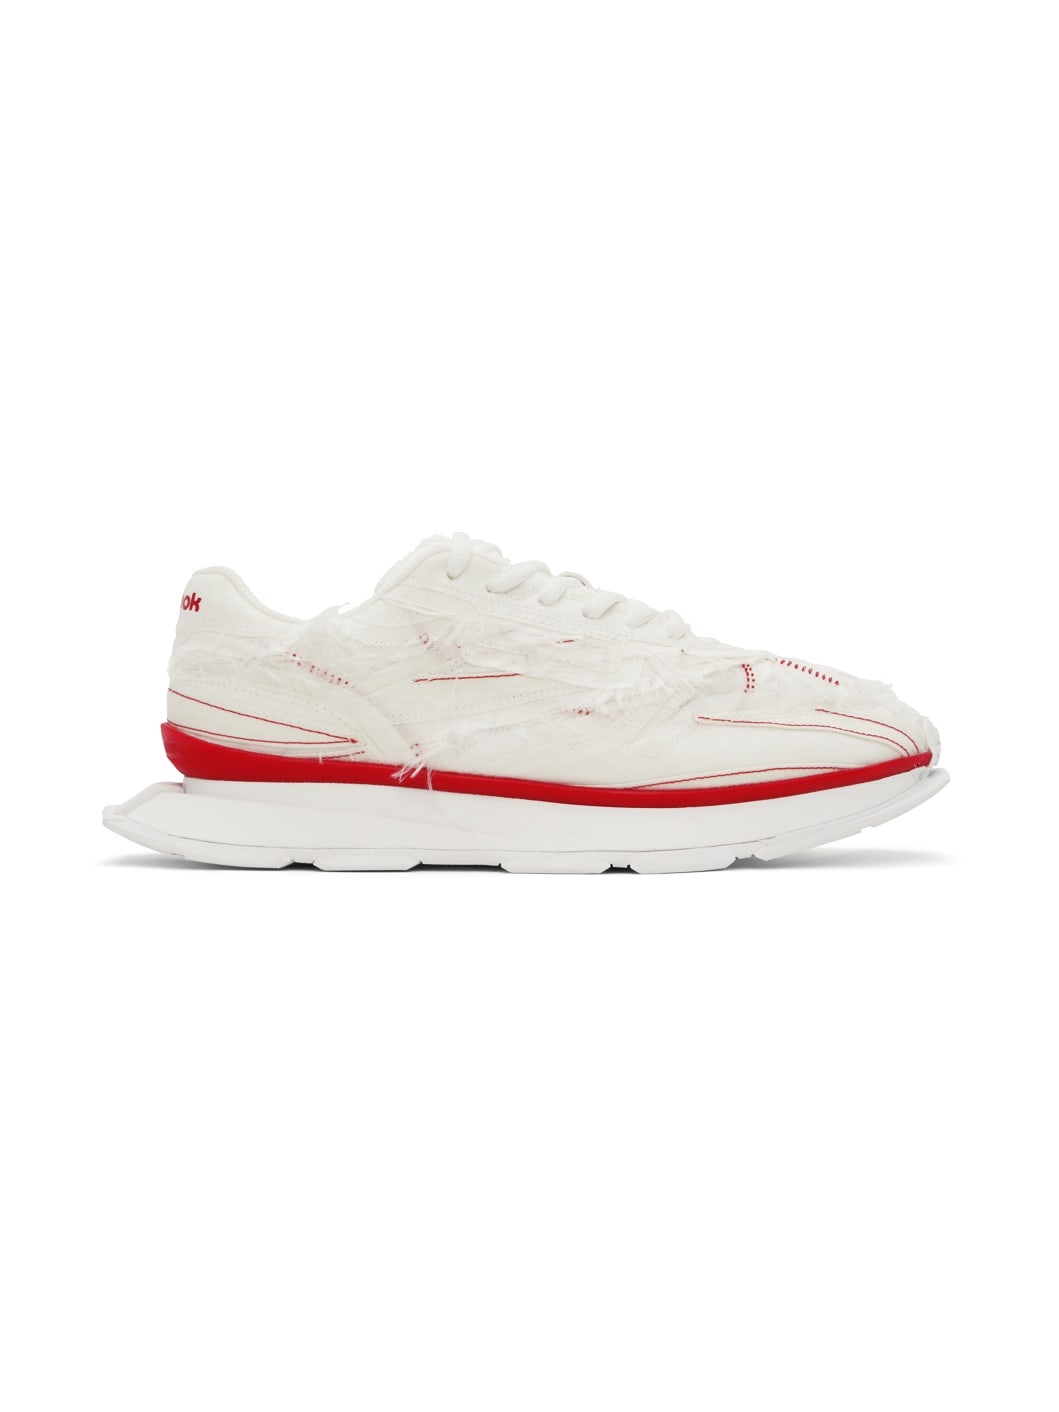 White Reebok Edition Classic Leather LTD Sneakers - 1